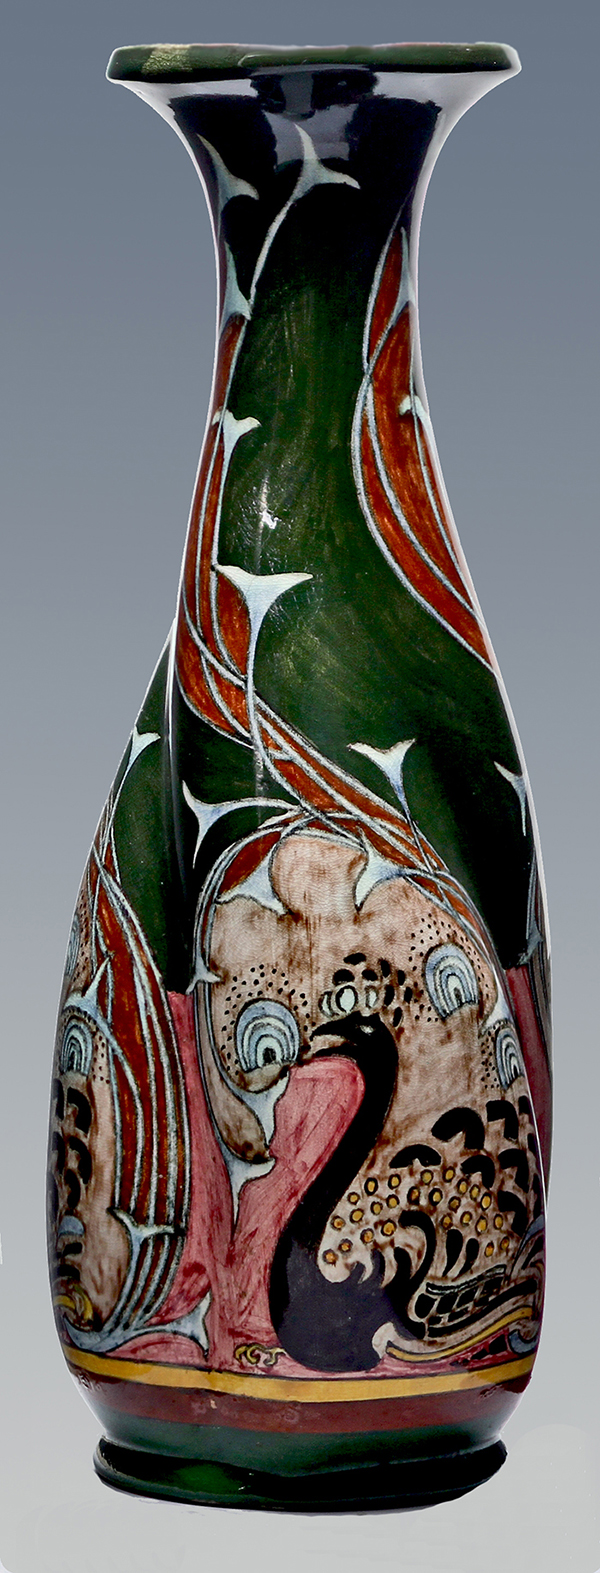 Nr.: 442, Already sold :  decorative pottery made by Brantjes,  Description: Plateel Vase, Height 31,4 cm width 12 cm, period: Year 1895-1904, Model : 1093, 